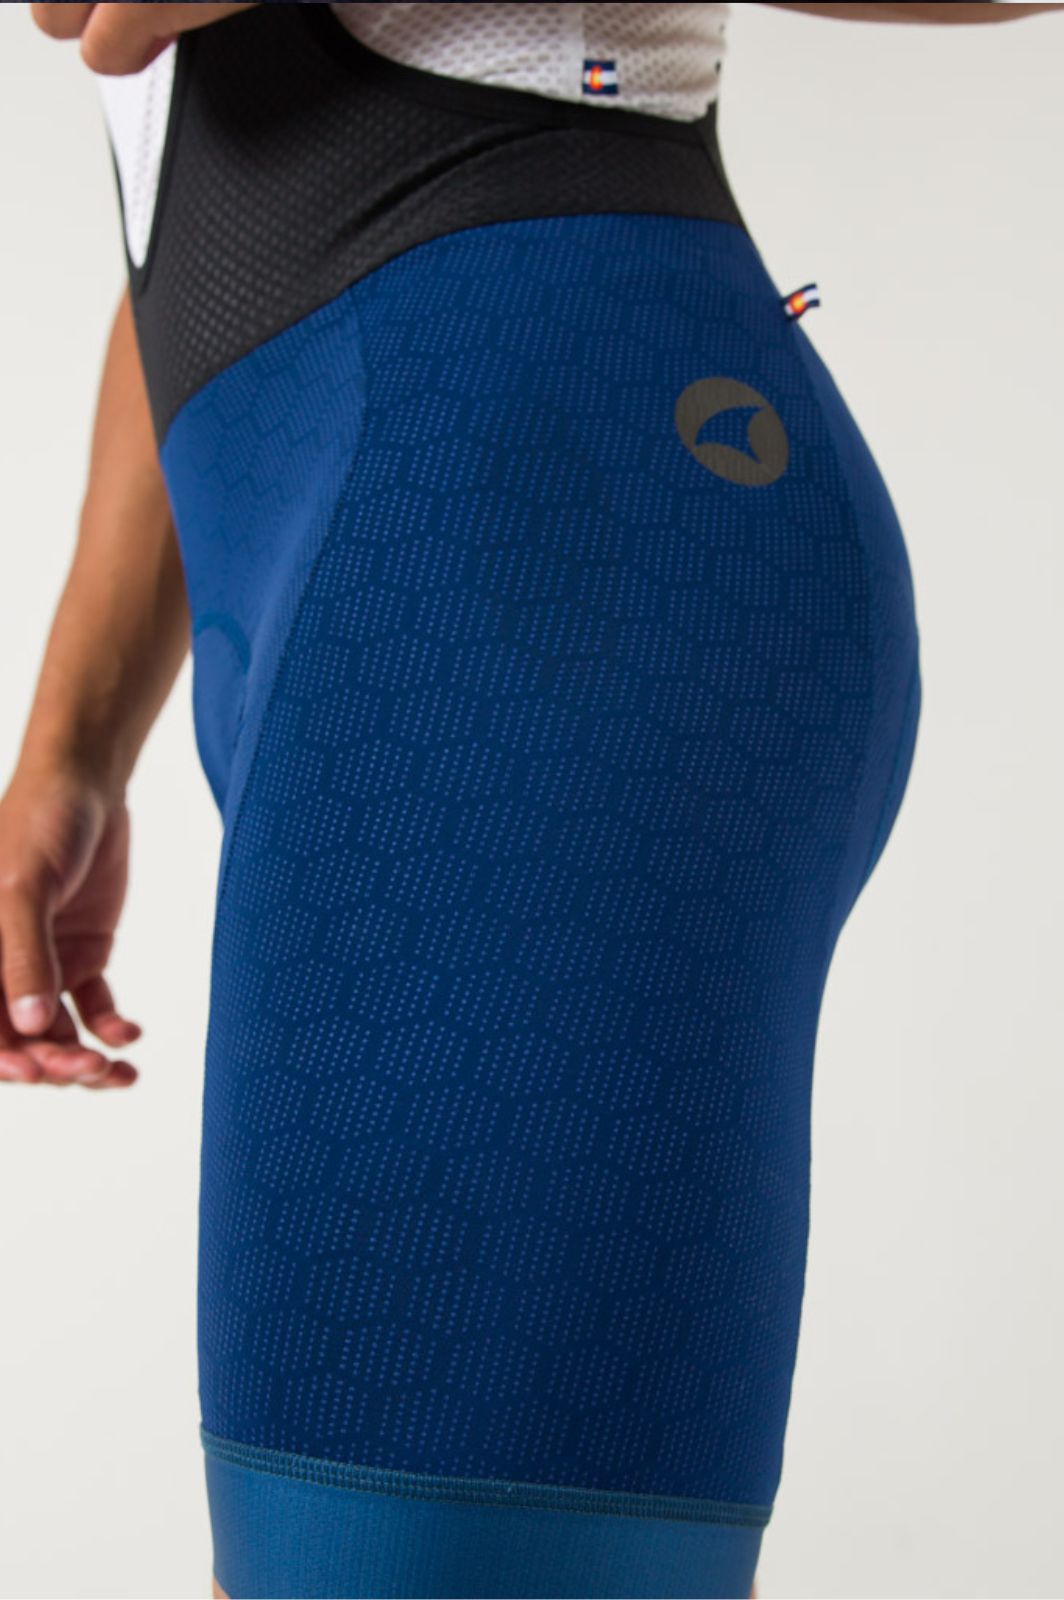 Men's Navy Blue Summit Stratos "12-Hour" Cycling Bibs - Side Detail